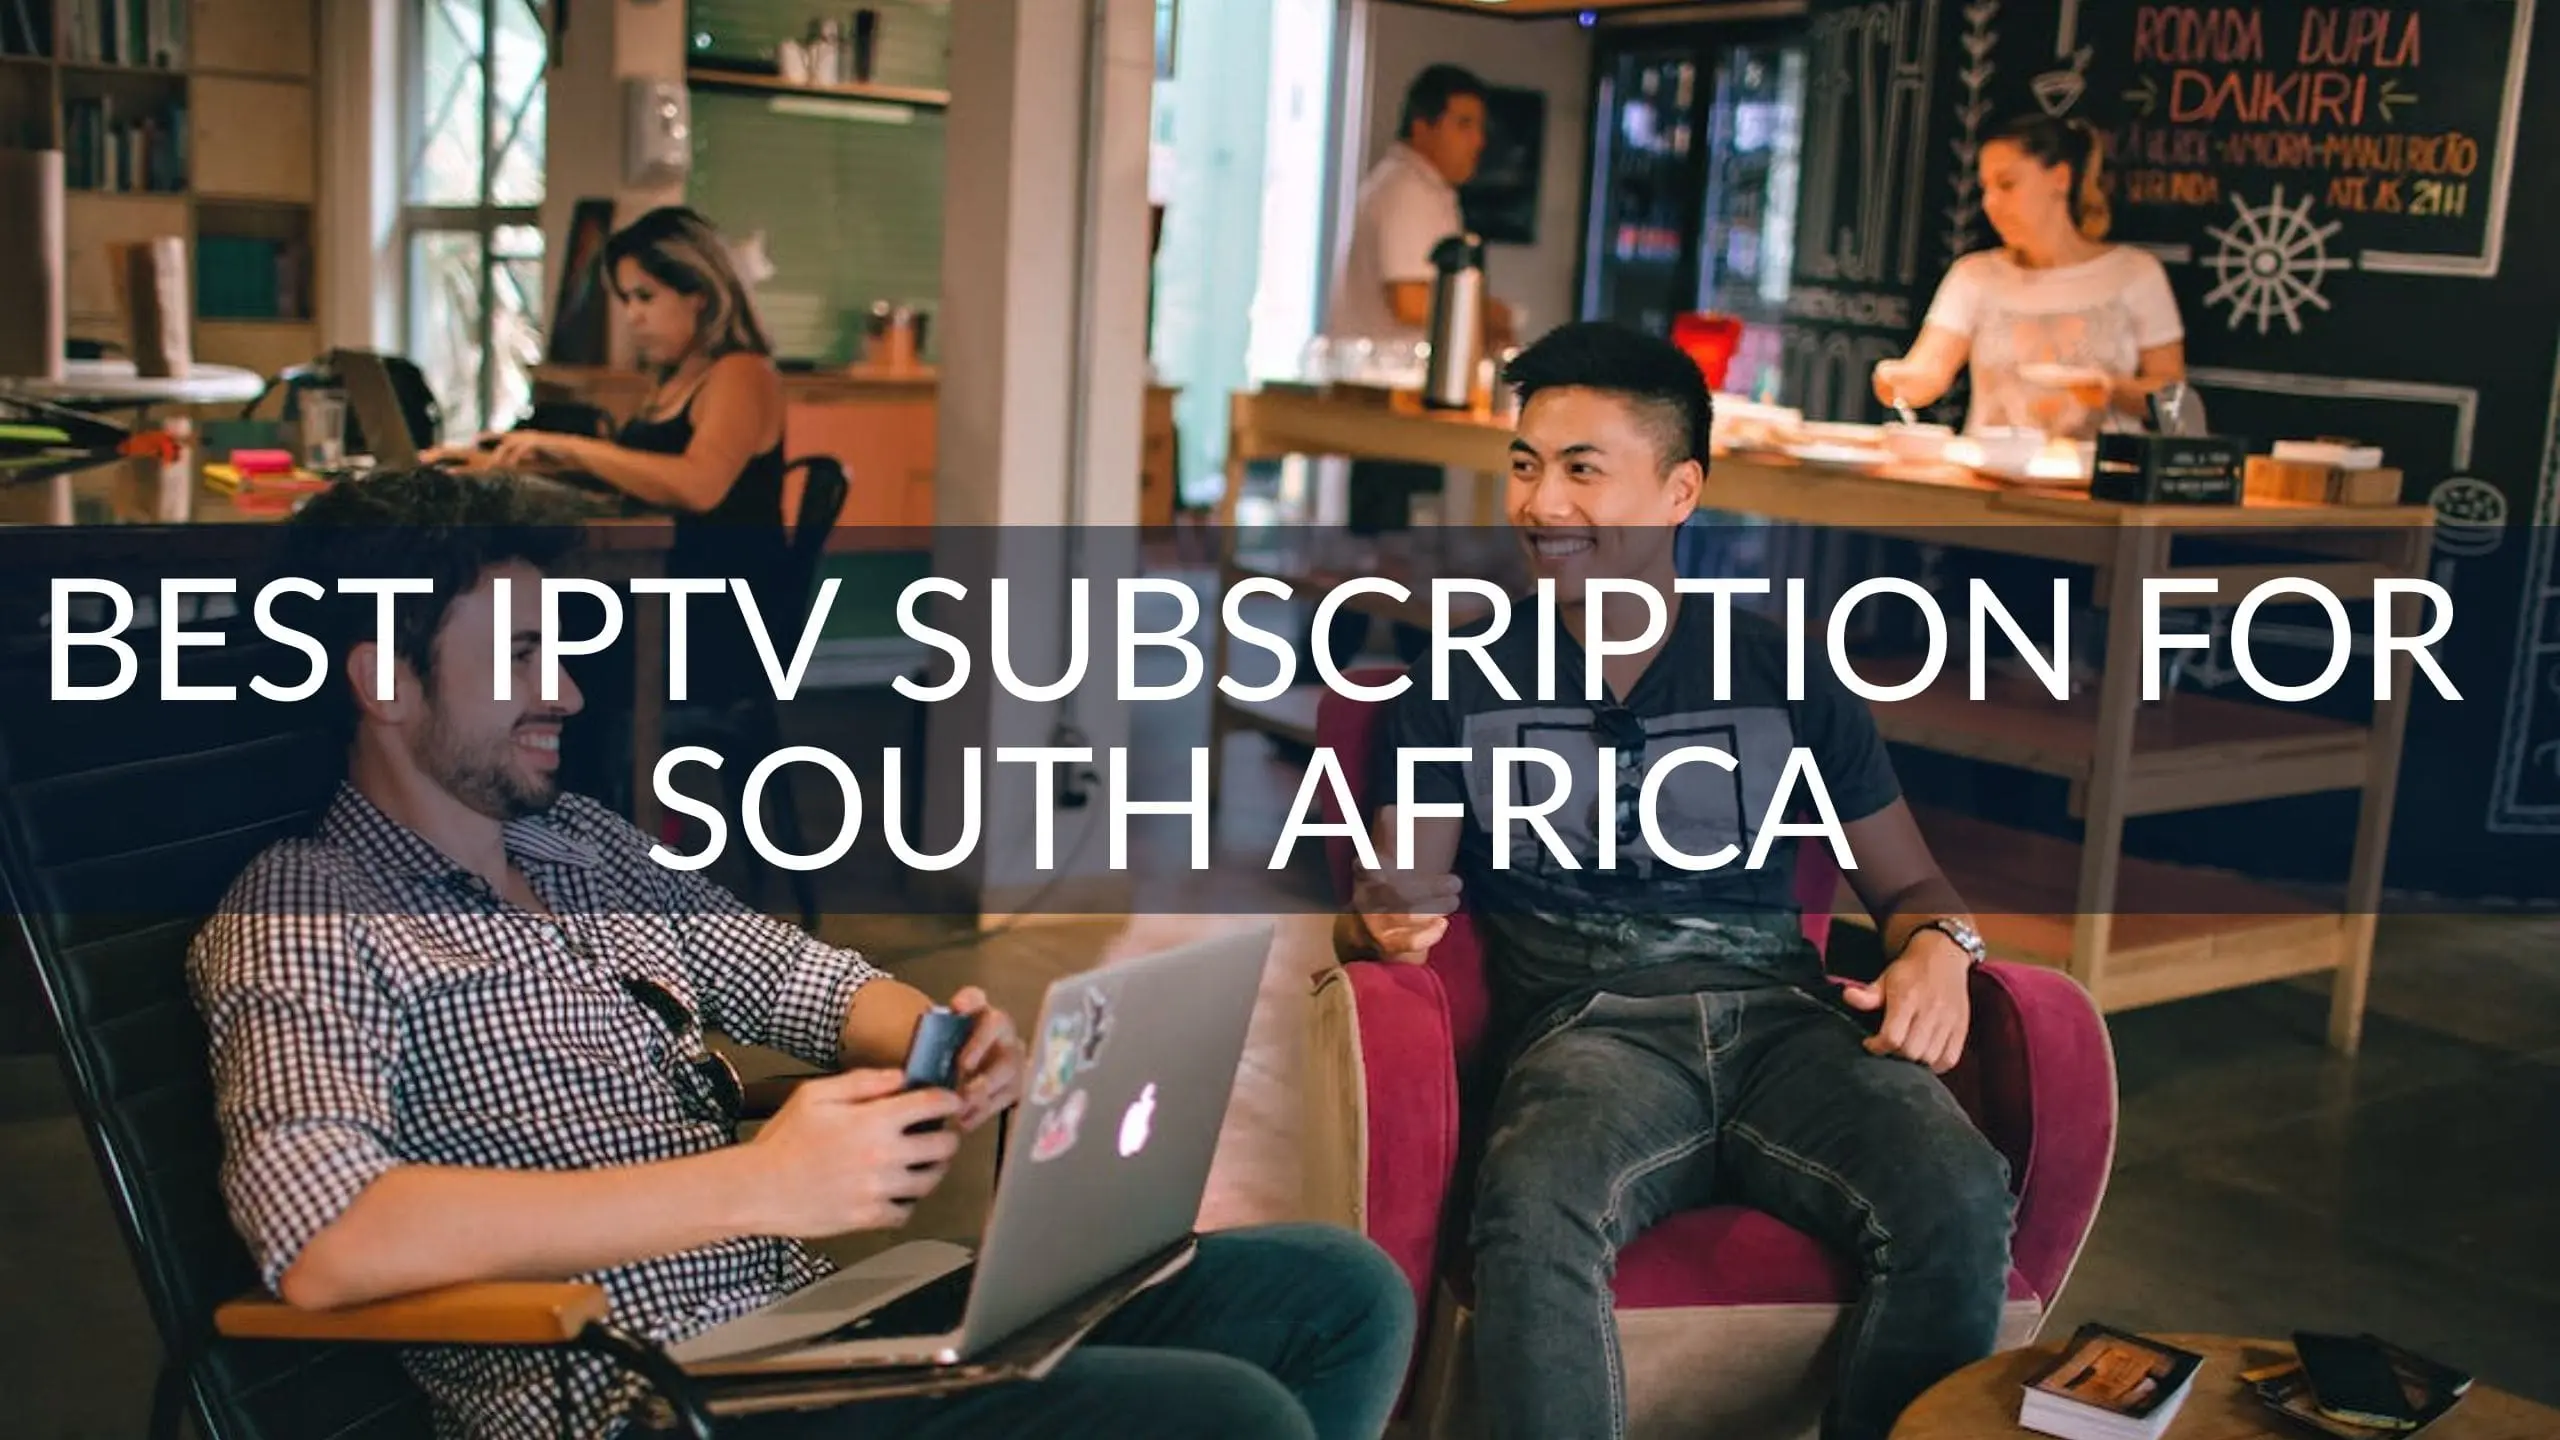 Best IPTV Subscription for South Africa